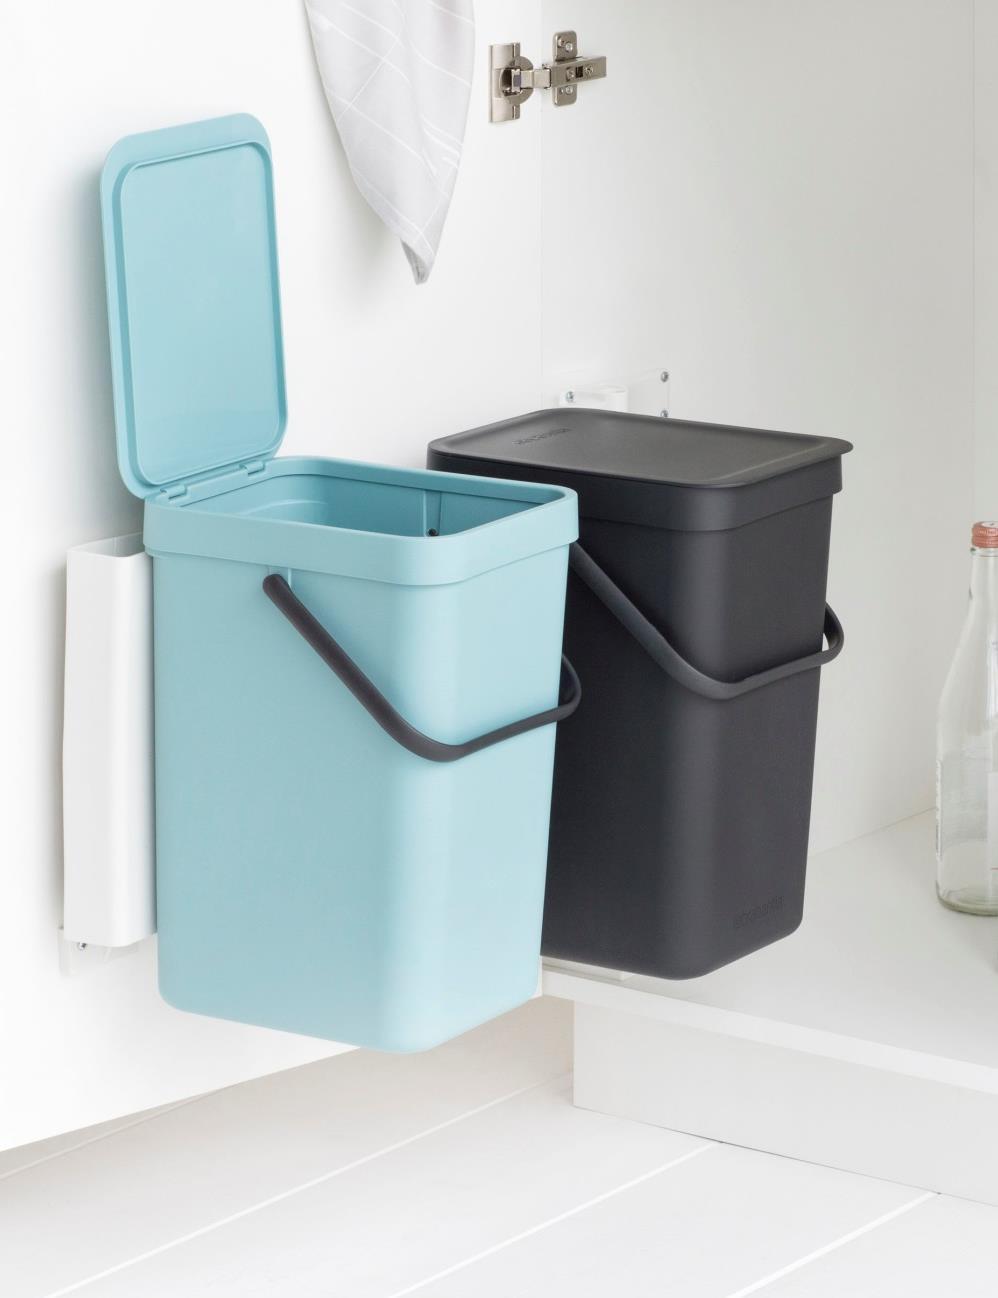 These bins can also be easily mounted on the wall.